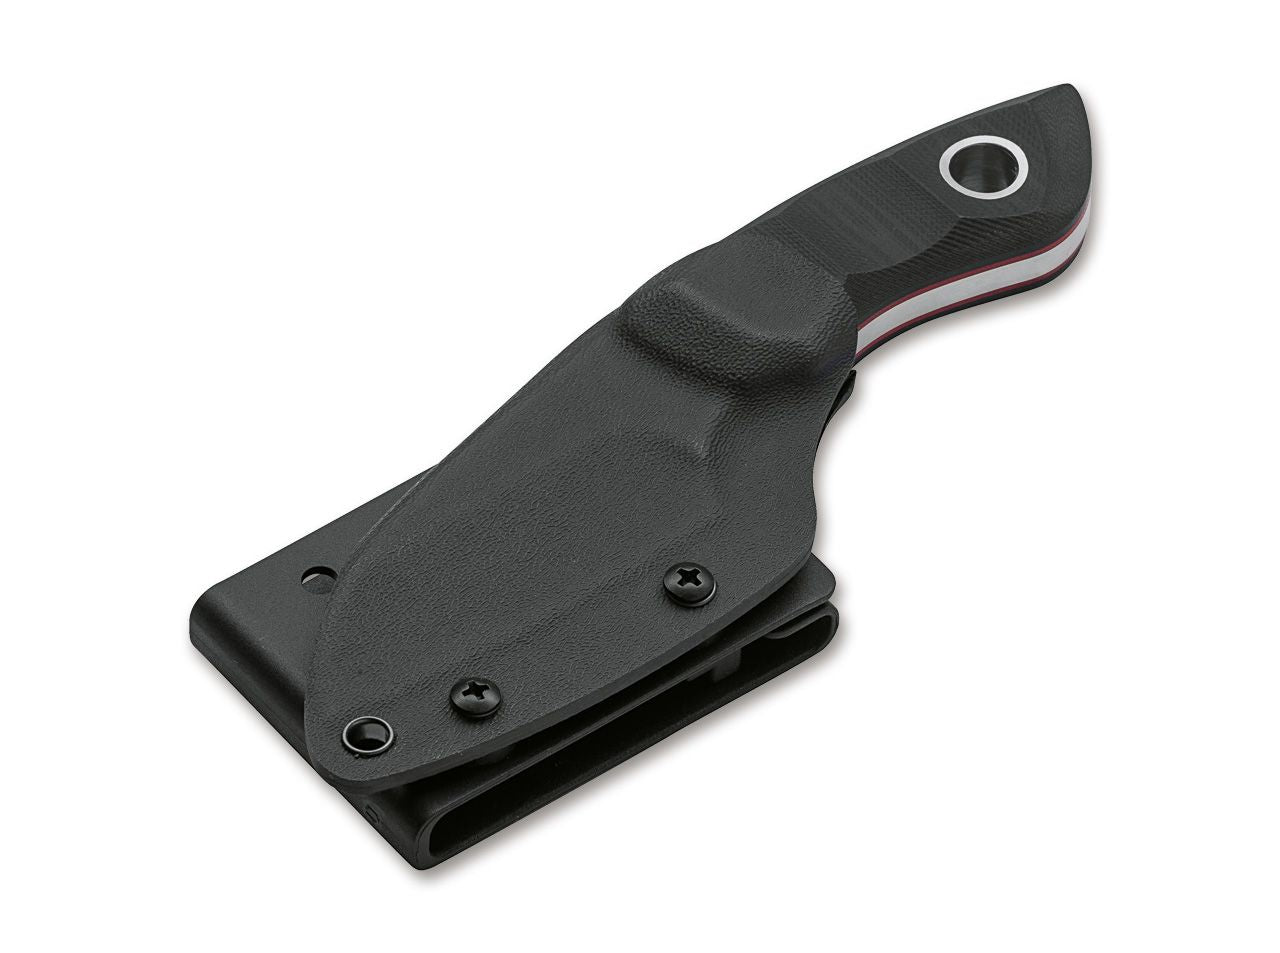 Boker Plus PryMate Pro 2.95" D2 G10 Fixed Blade Knife with Kydex Sheath 02BO016